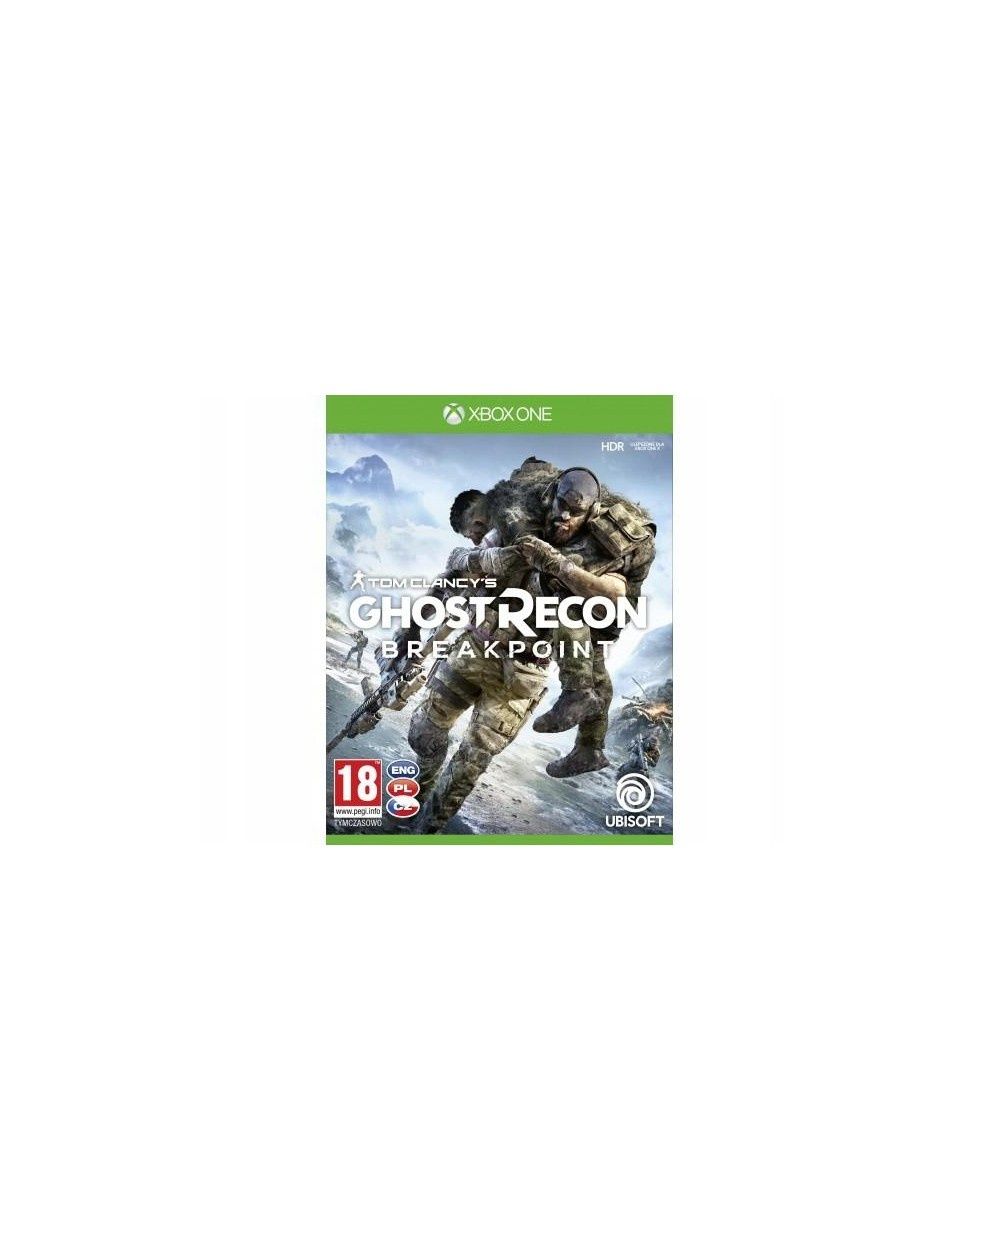 Ghost recon breakpoint (cd) xbox one